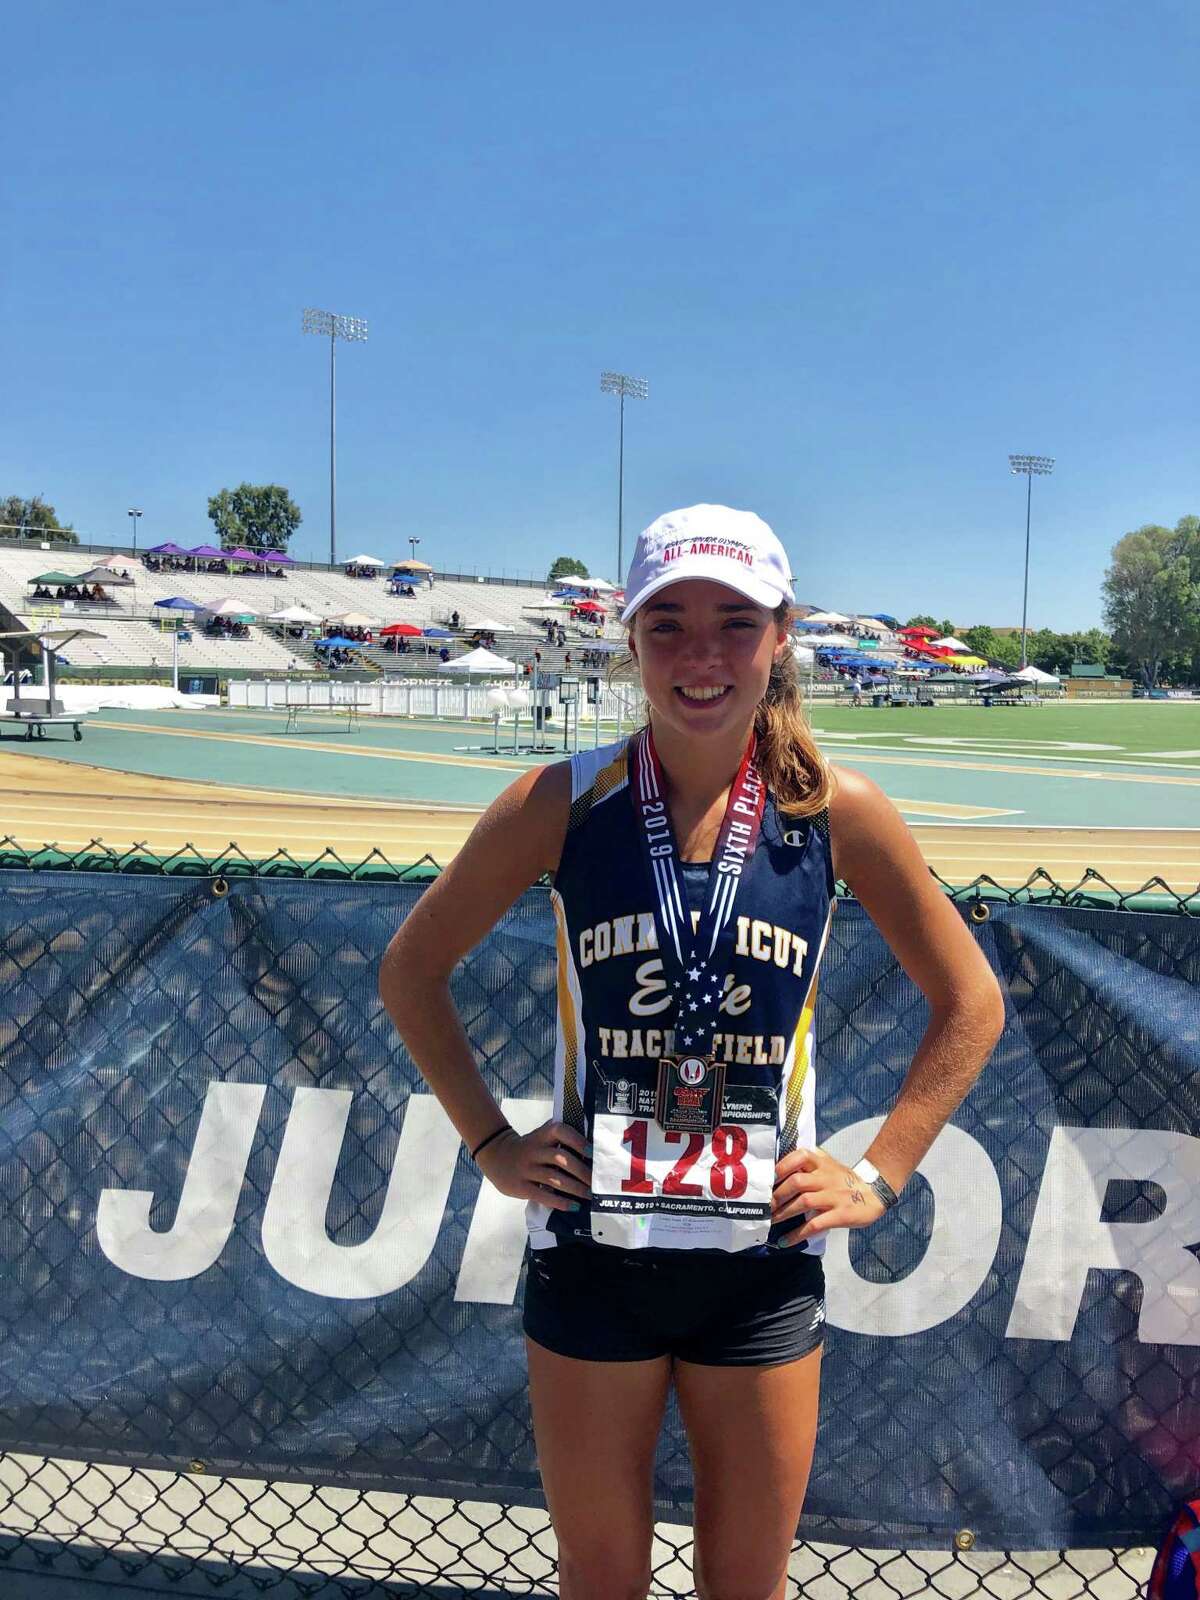 Emma Langis, a rising senior at Ridgefield High School, earned USATF (USA Track & Field) All-American honors by finishing sixth in the women's 17-18 400-meter hurdles at the USATF Junior Olympic championships in Sacramento, Calif. Competing for the Wilton-based Connecticut Elite Track & Field Club, Langis had a time of 1:02.01.